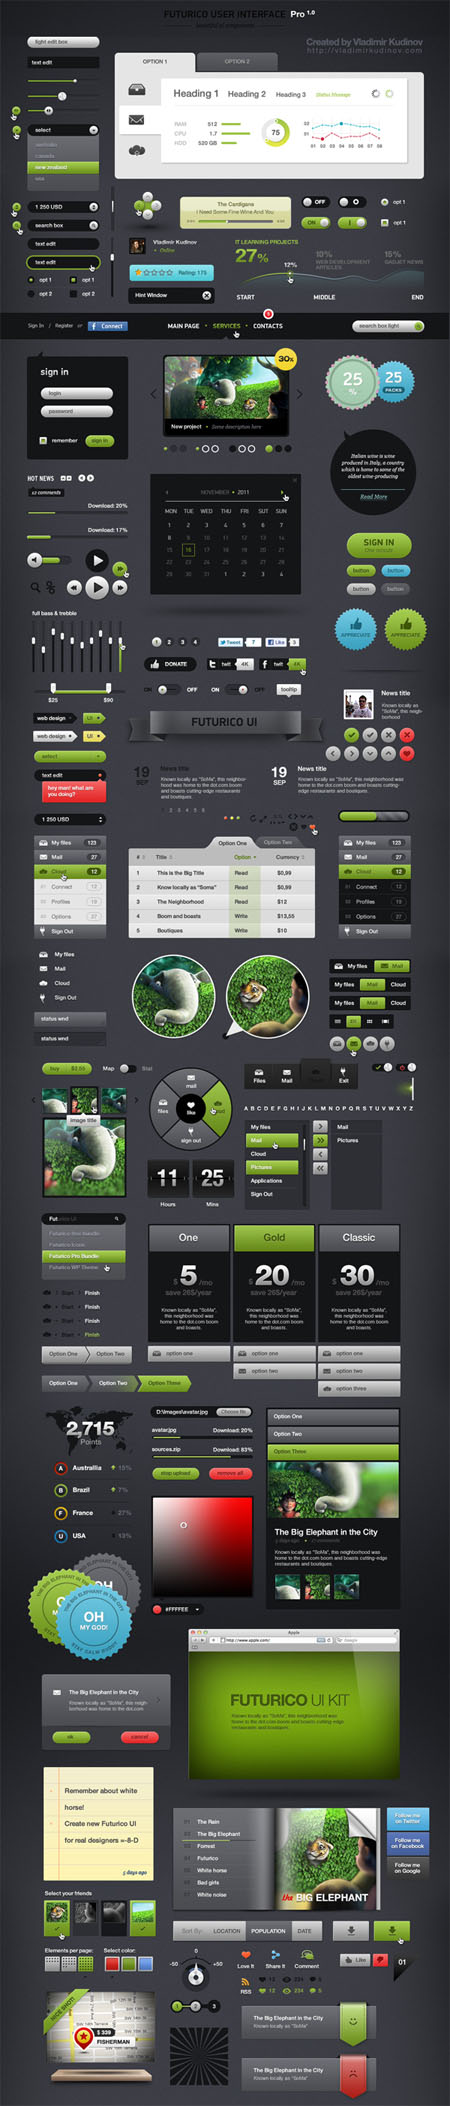 Futurico Pro User Interface Elements PSD pack (200 elements)